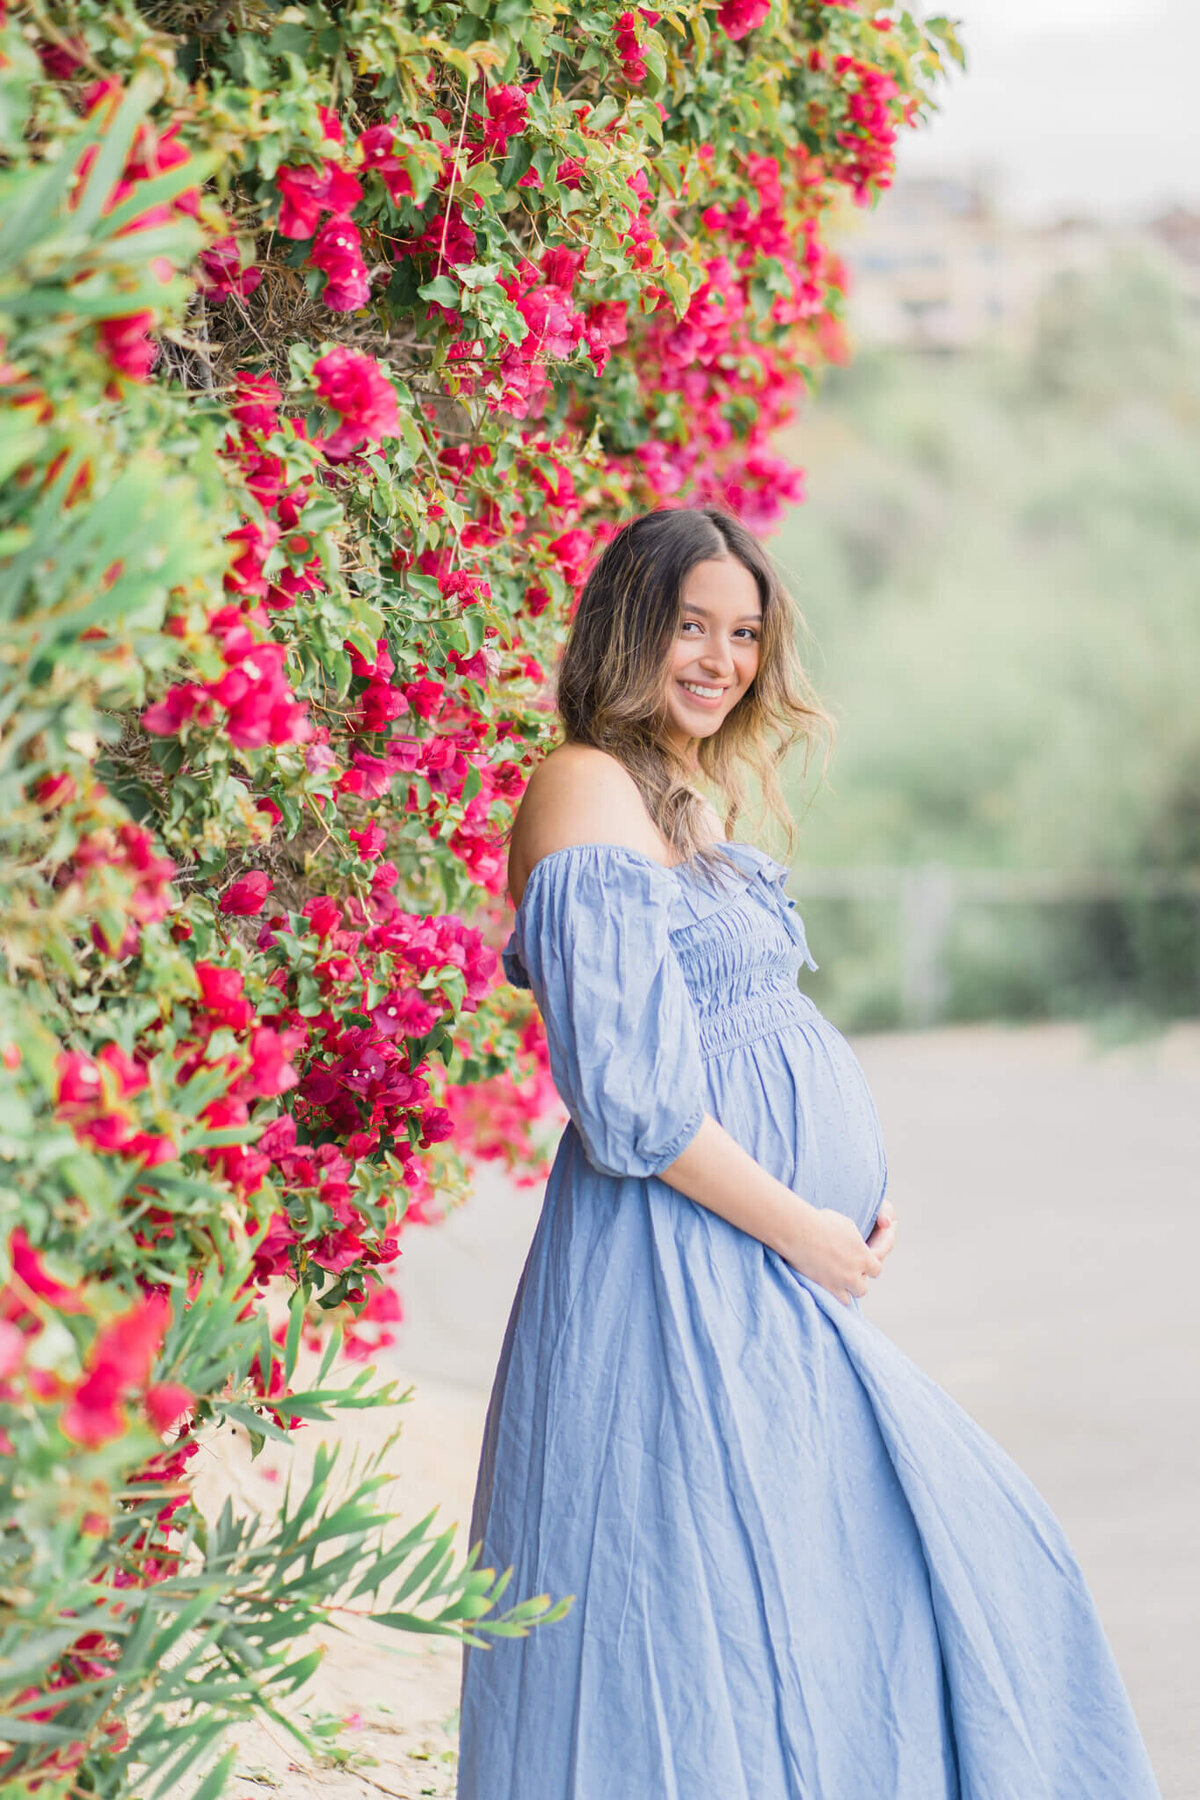 Pregnant mom in blue dress leaning against a wall of pink flowers